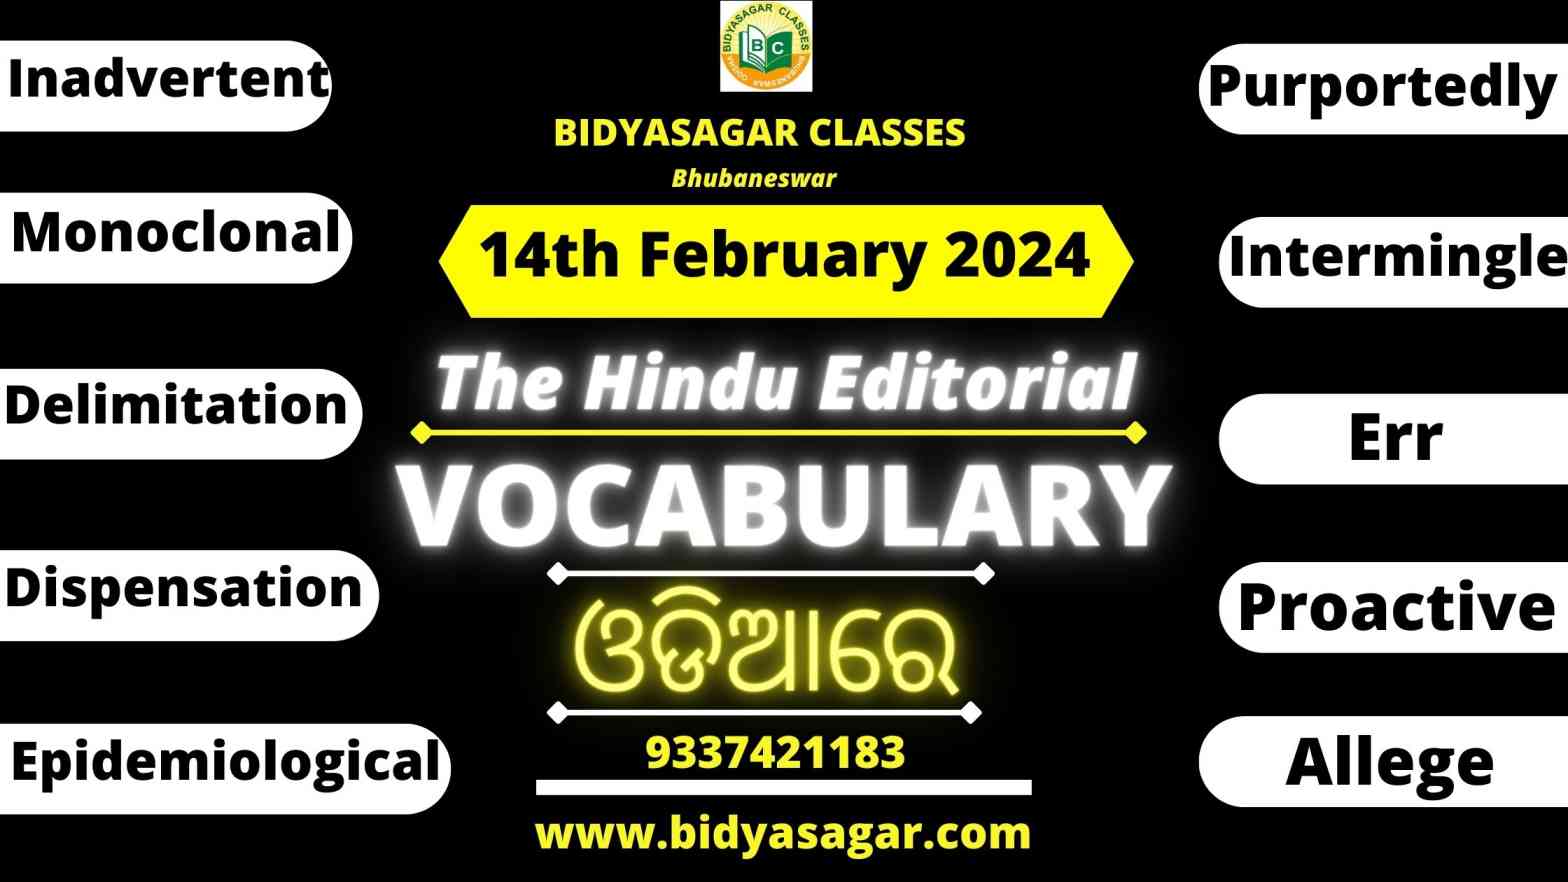 The Hindu Editorial Vocabulary of 14th February 2024